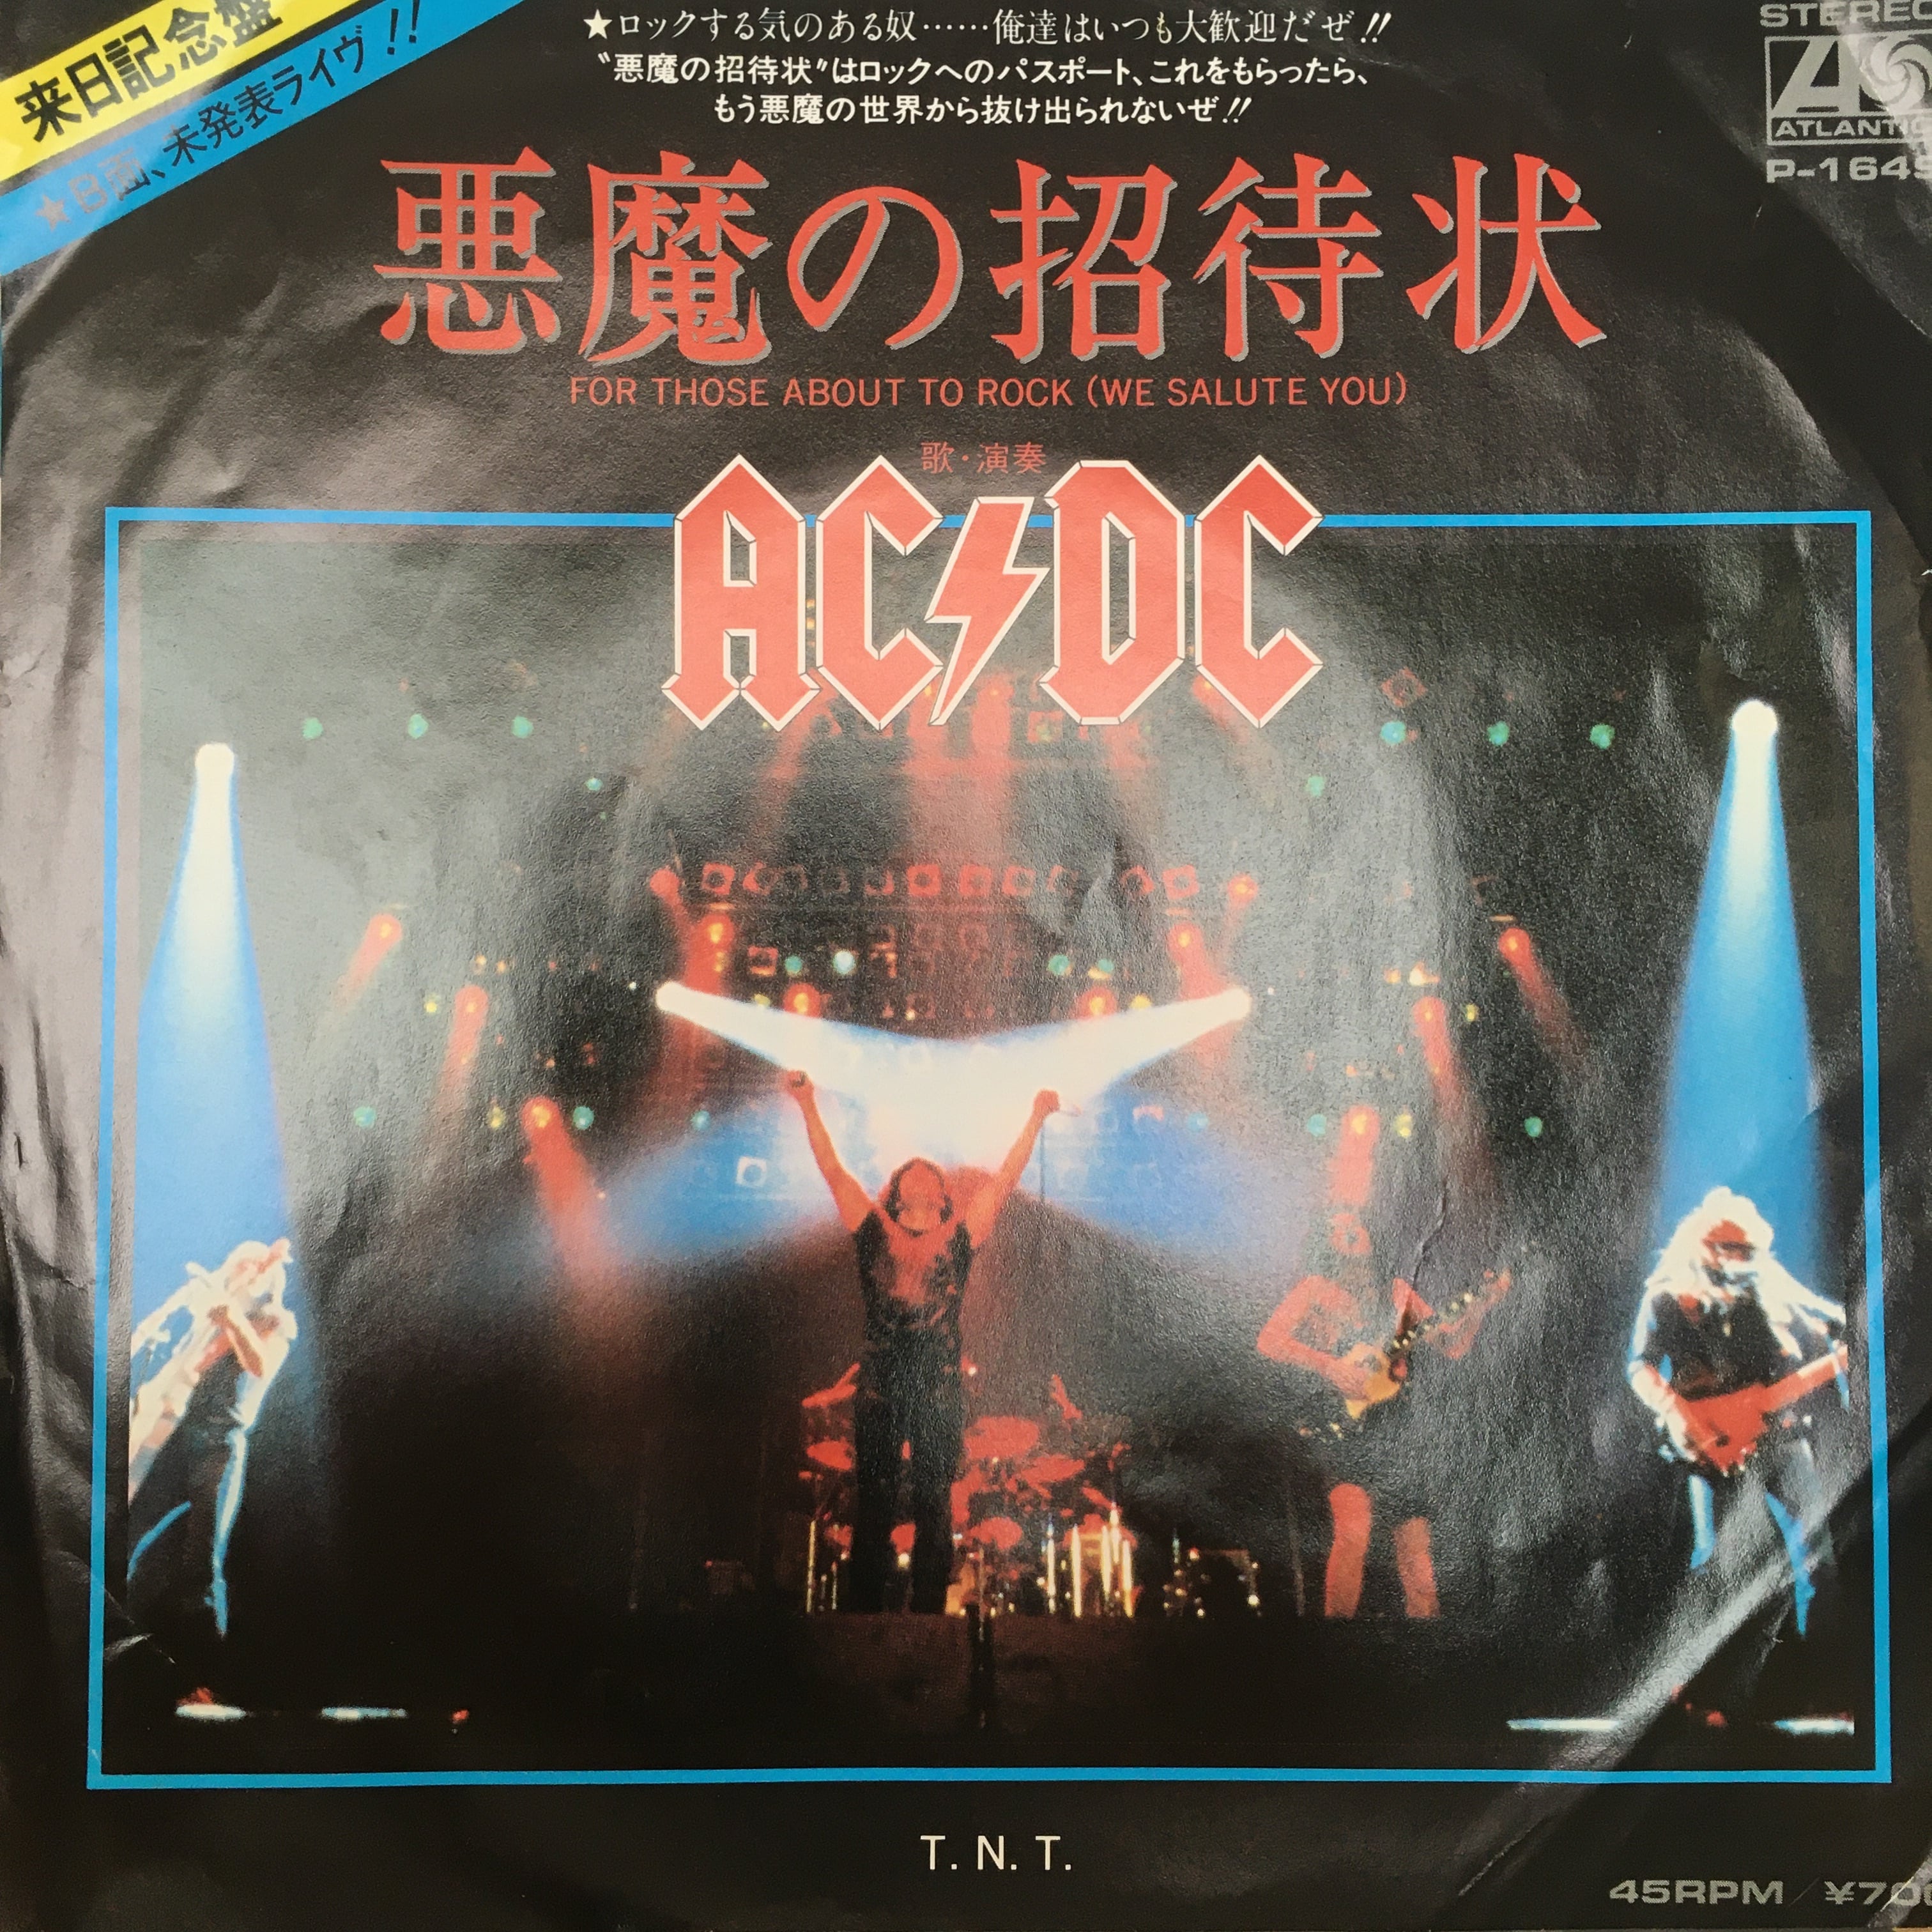 【EP】AC/DC/悪魔の招待状 | Downtown Records 45 Branch